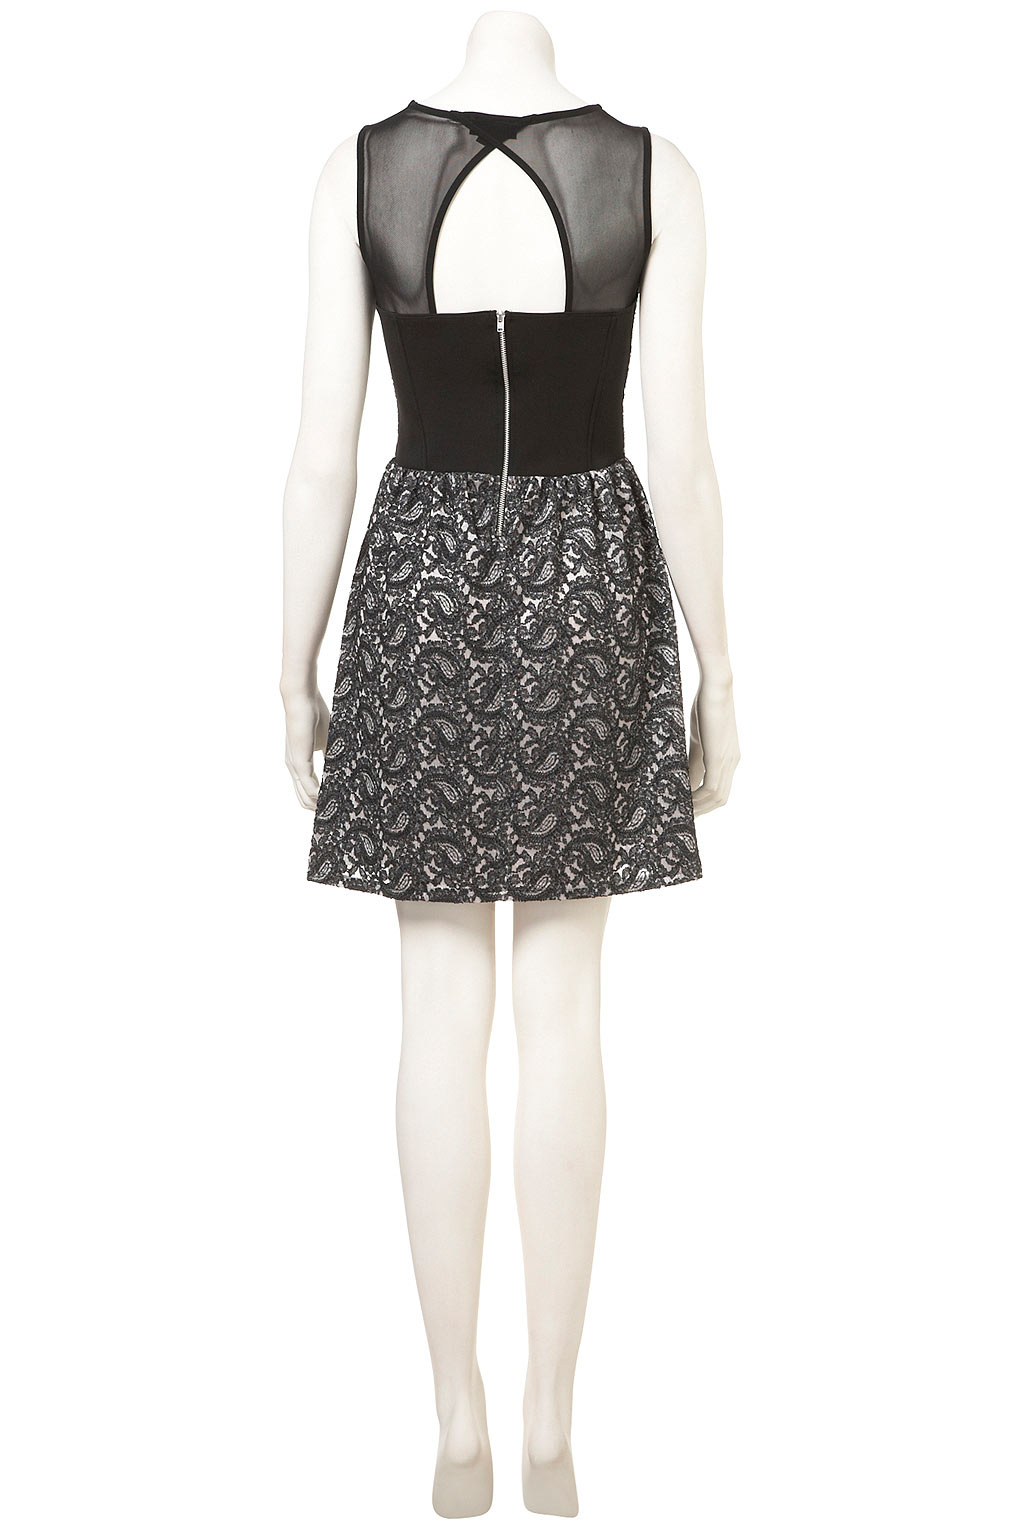 Lyst - Topshop Paisley Lace Mesh Top Tunic in Black